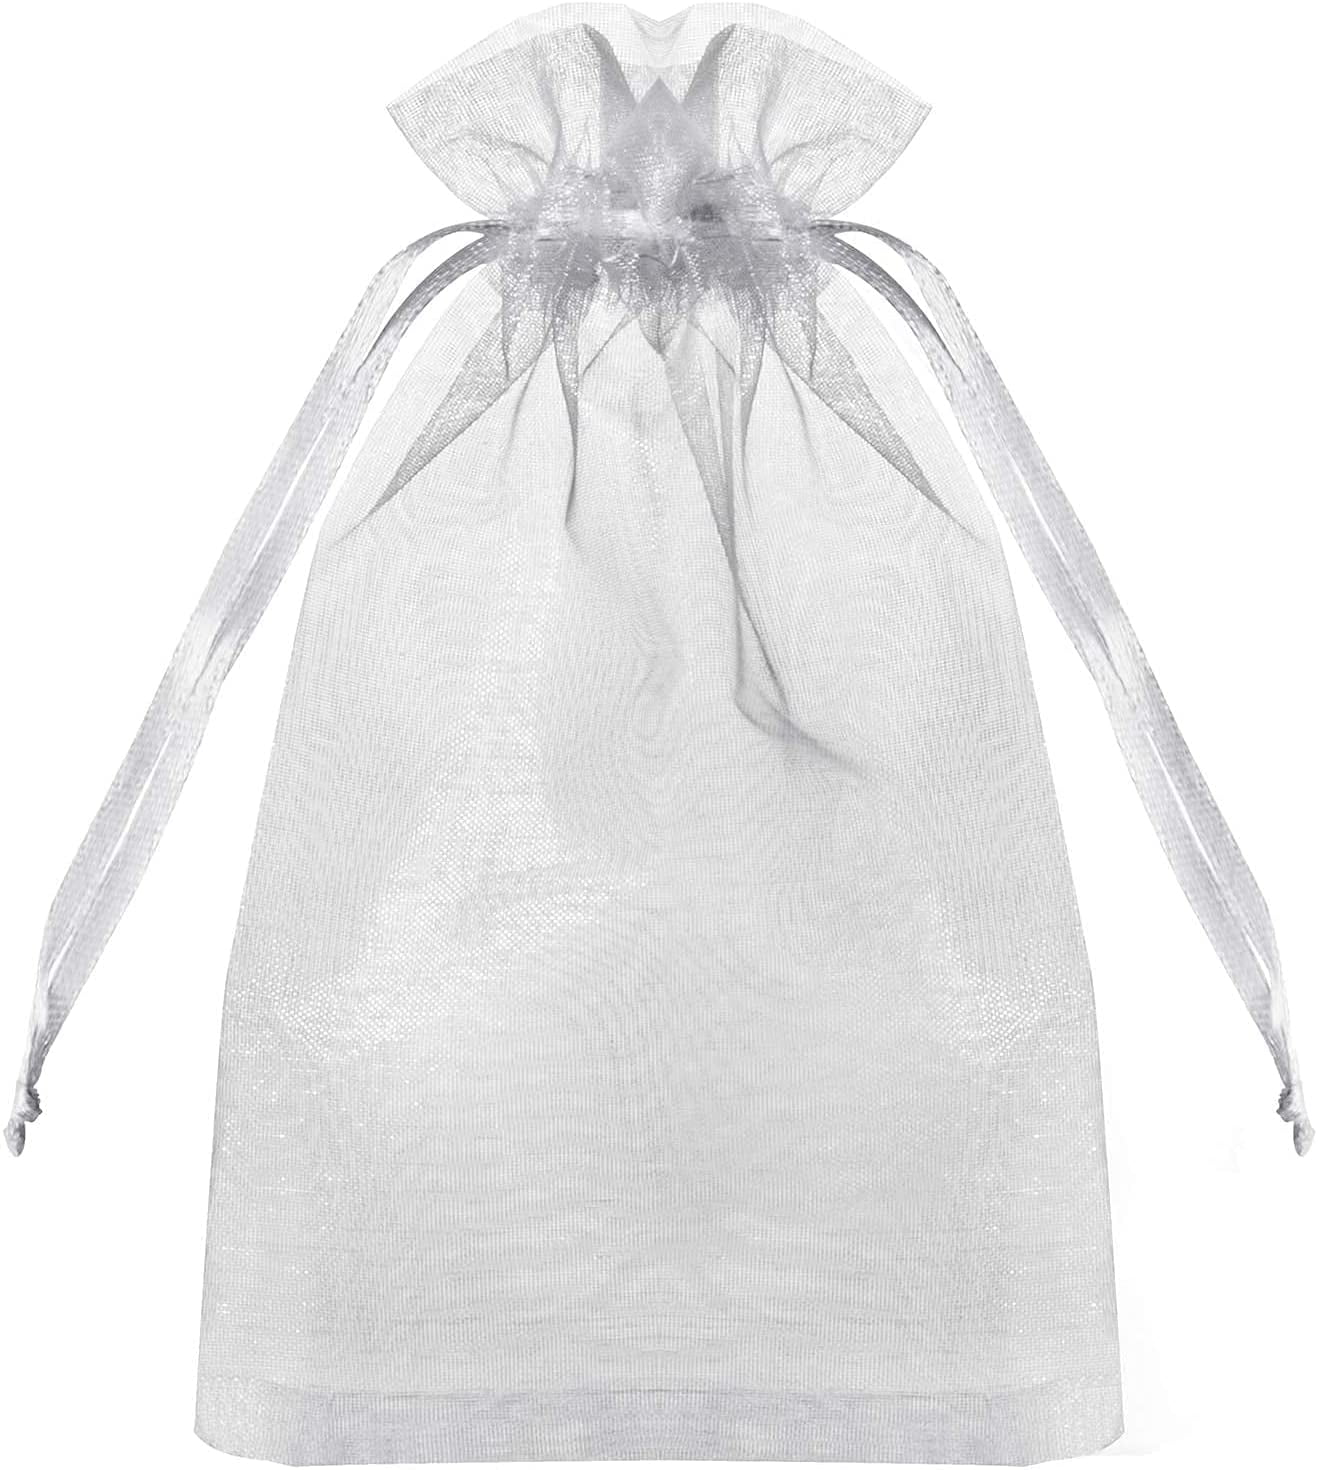 TheDisplayGuys 100-Pack 6x8 Navy Blue Sheer Organza Gift Bags with  Drawstring, Jewelry Candy Treat Wedding Party Favors Mesh Pouch